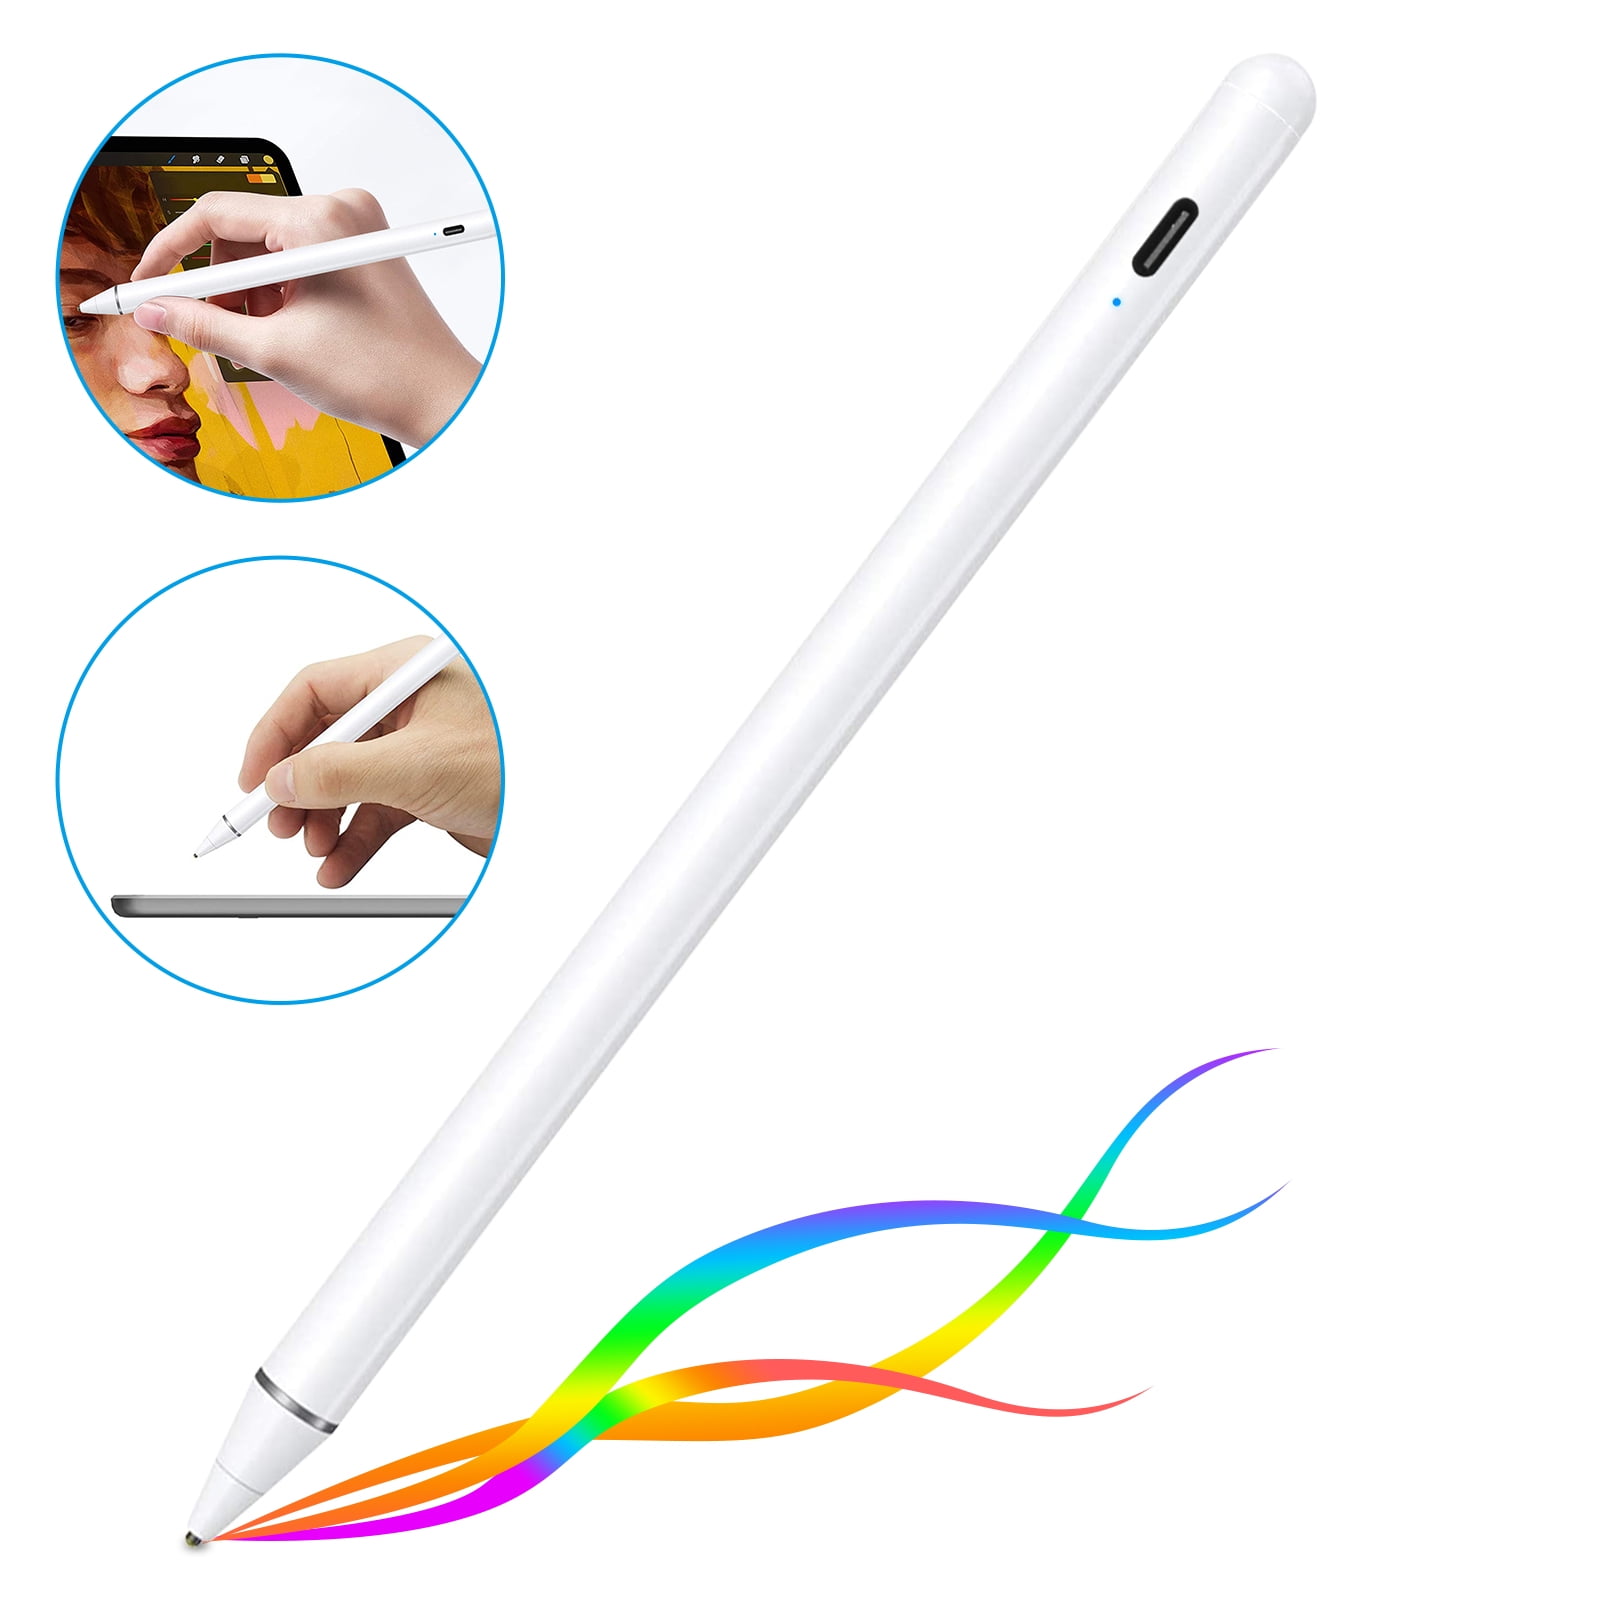 Stylus Pen for Touch Screen Pen for iPad High Sensitivity iPad Pencil Magnetic Pen Compatible with iPad/iPad Pro/iPad Air/iPad Mini/iPhone/Samsung tablet/Huawei Android Phone and Tablet